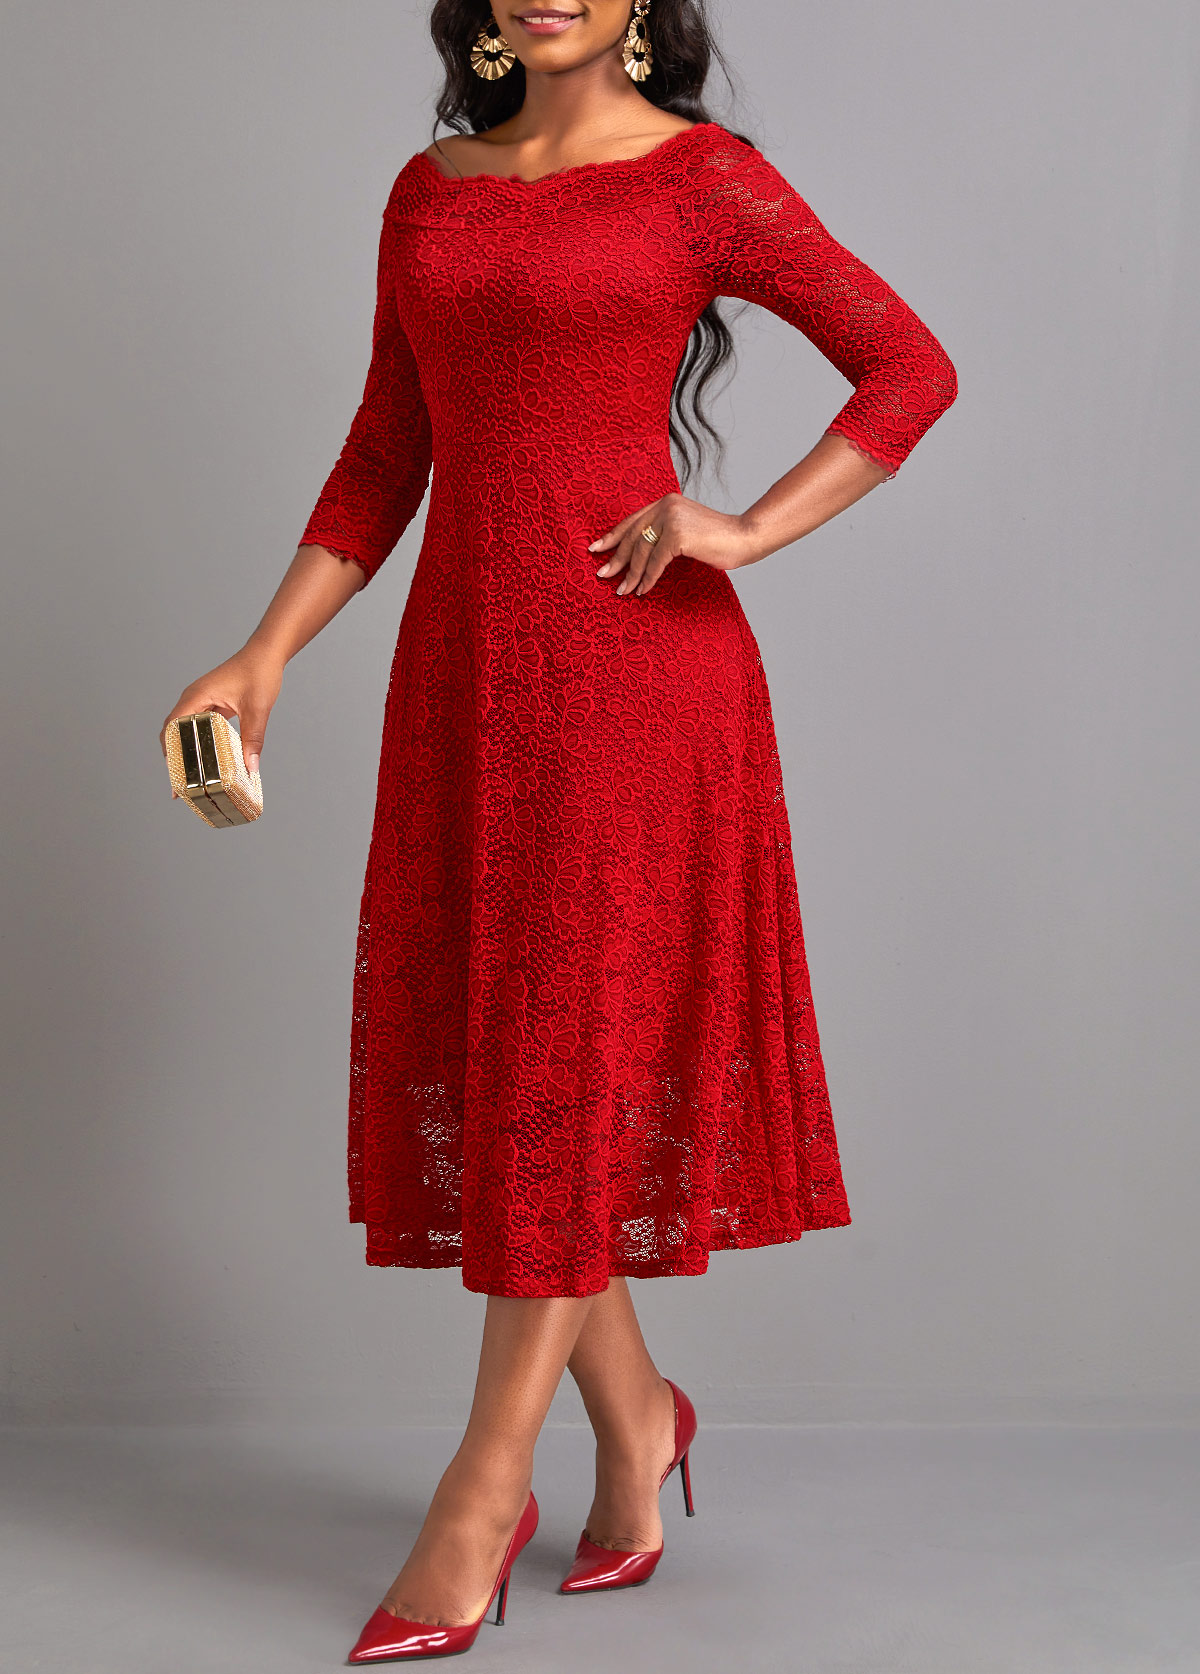 Lace Red Boat Neck Layered Dress